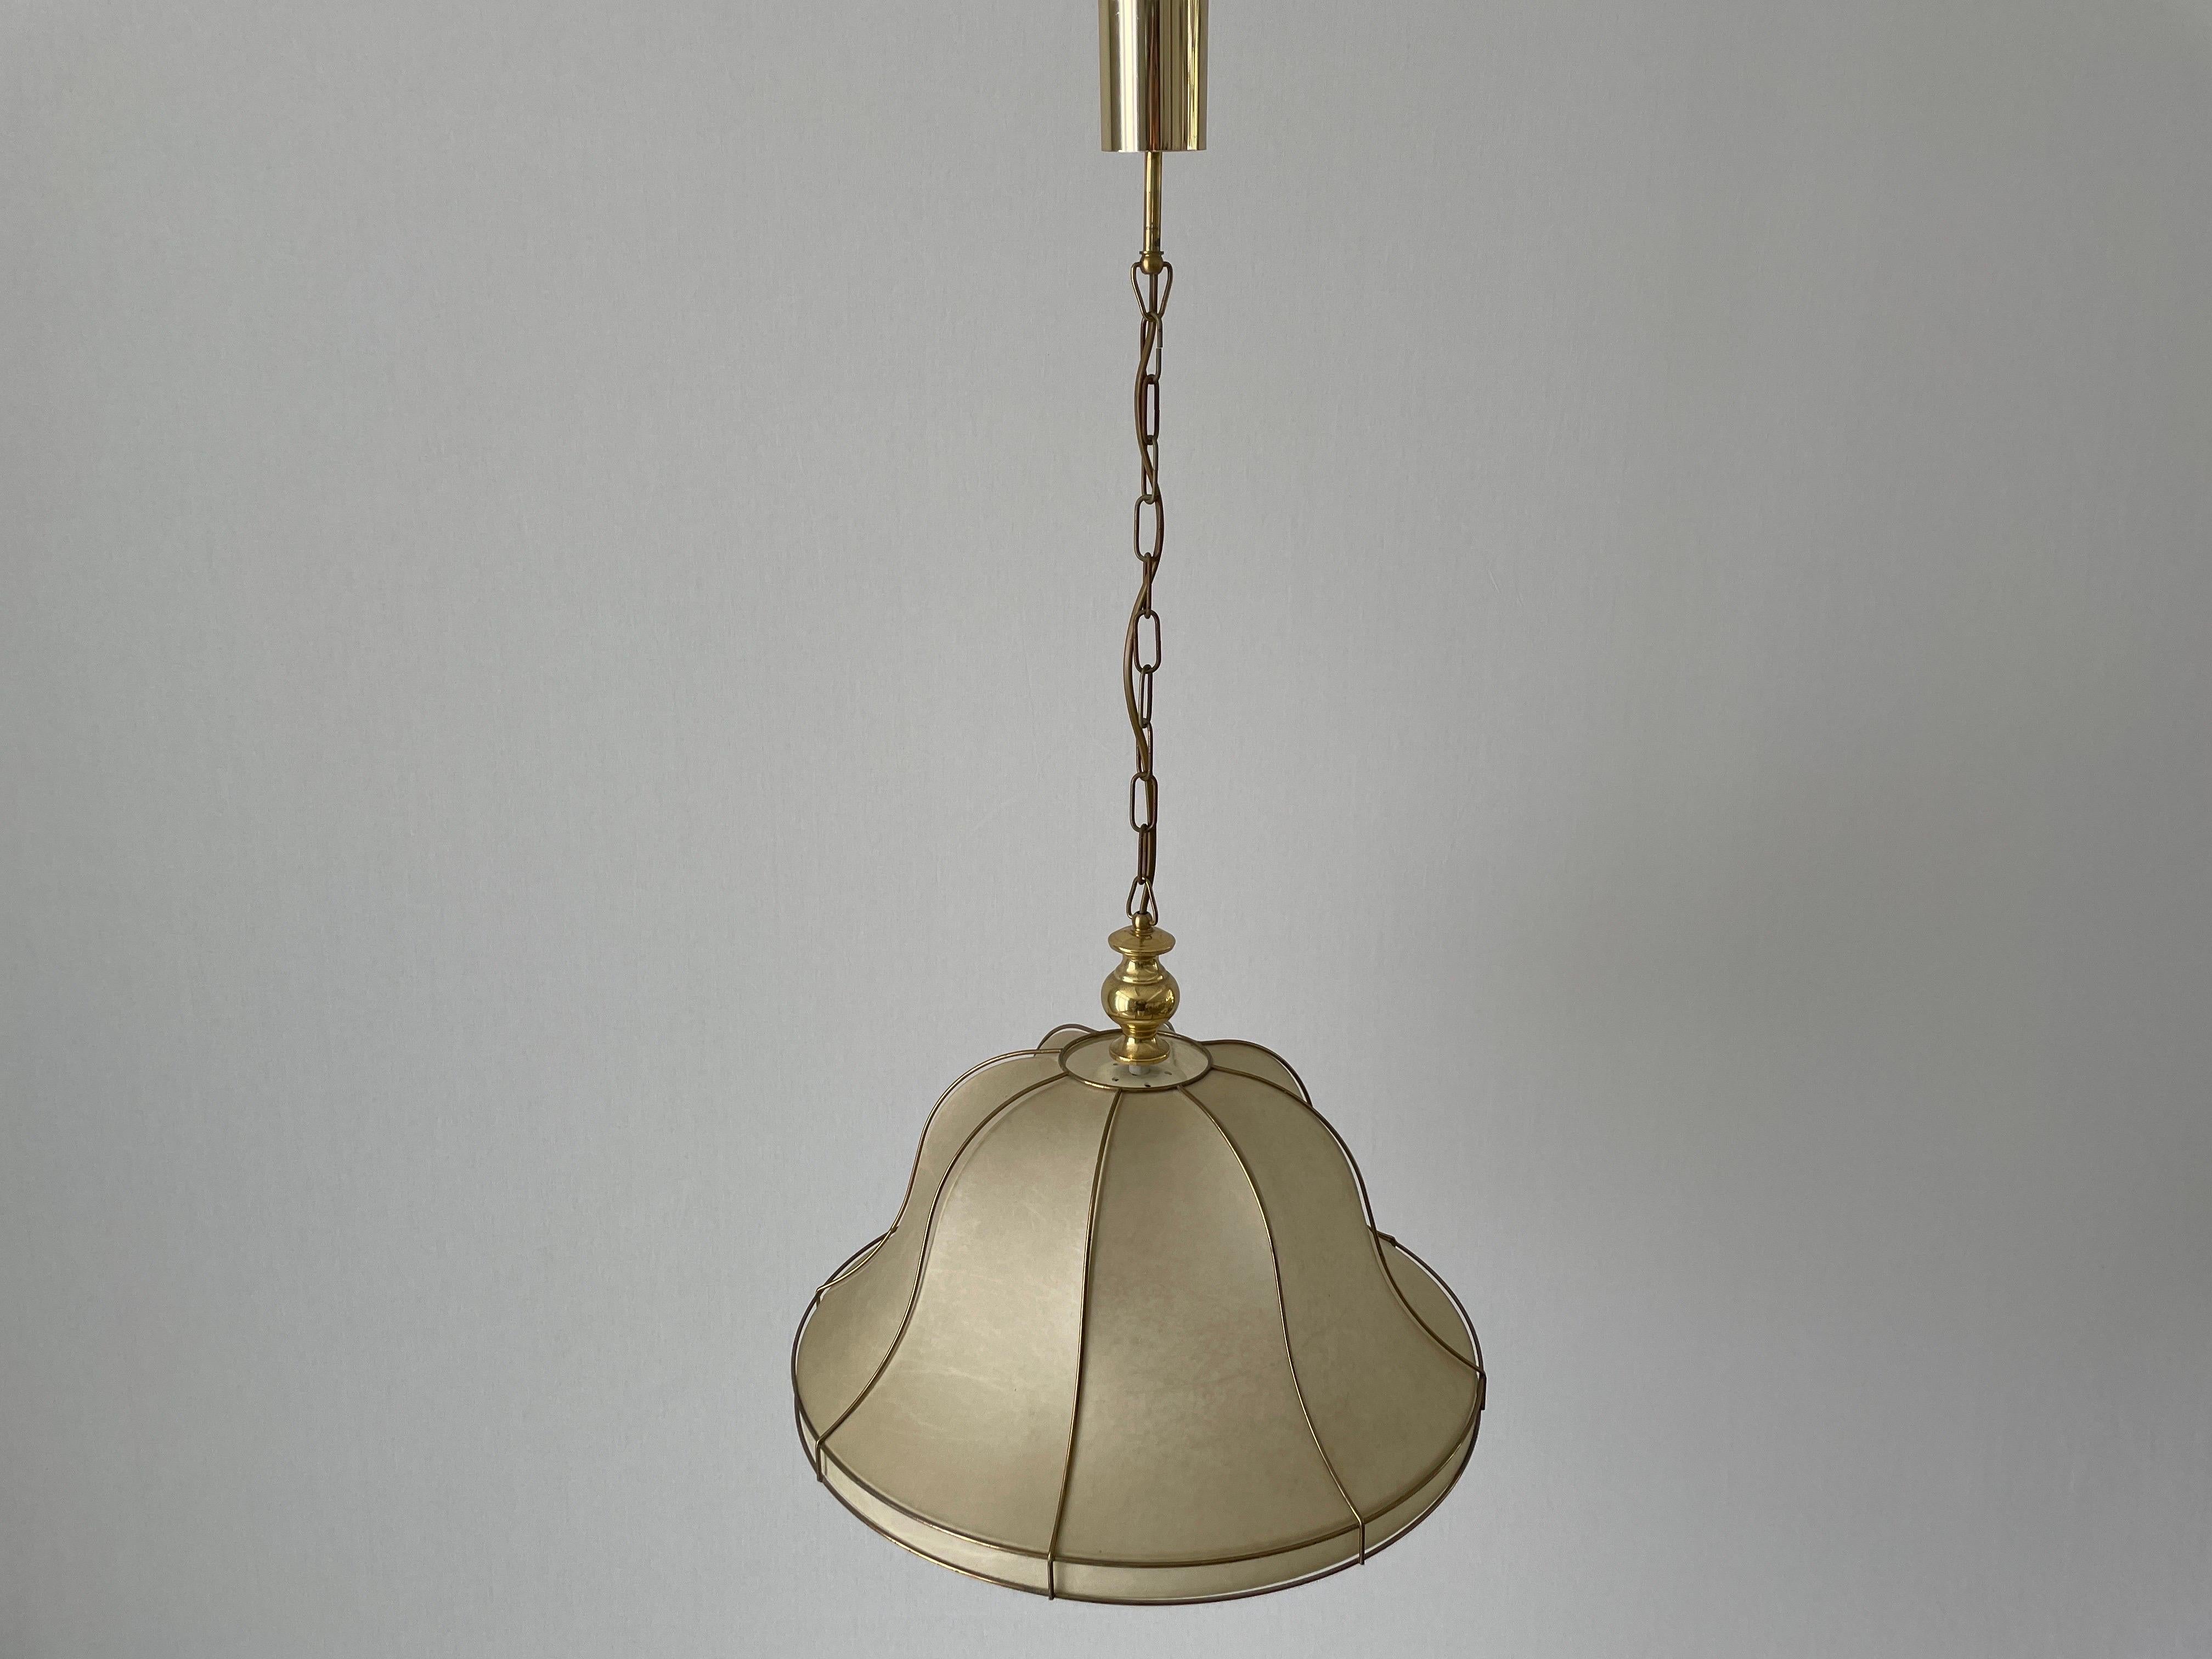 Resin Cocoon Pendant Lamp with Gold Metal Shade Frame by Goldkant, 1960s, Germany For Sale